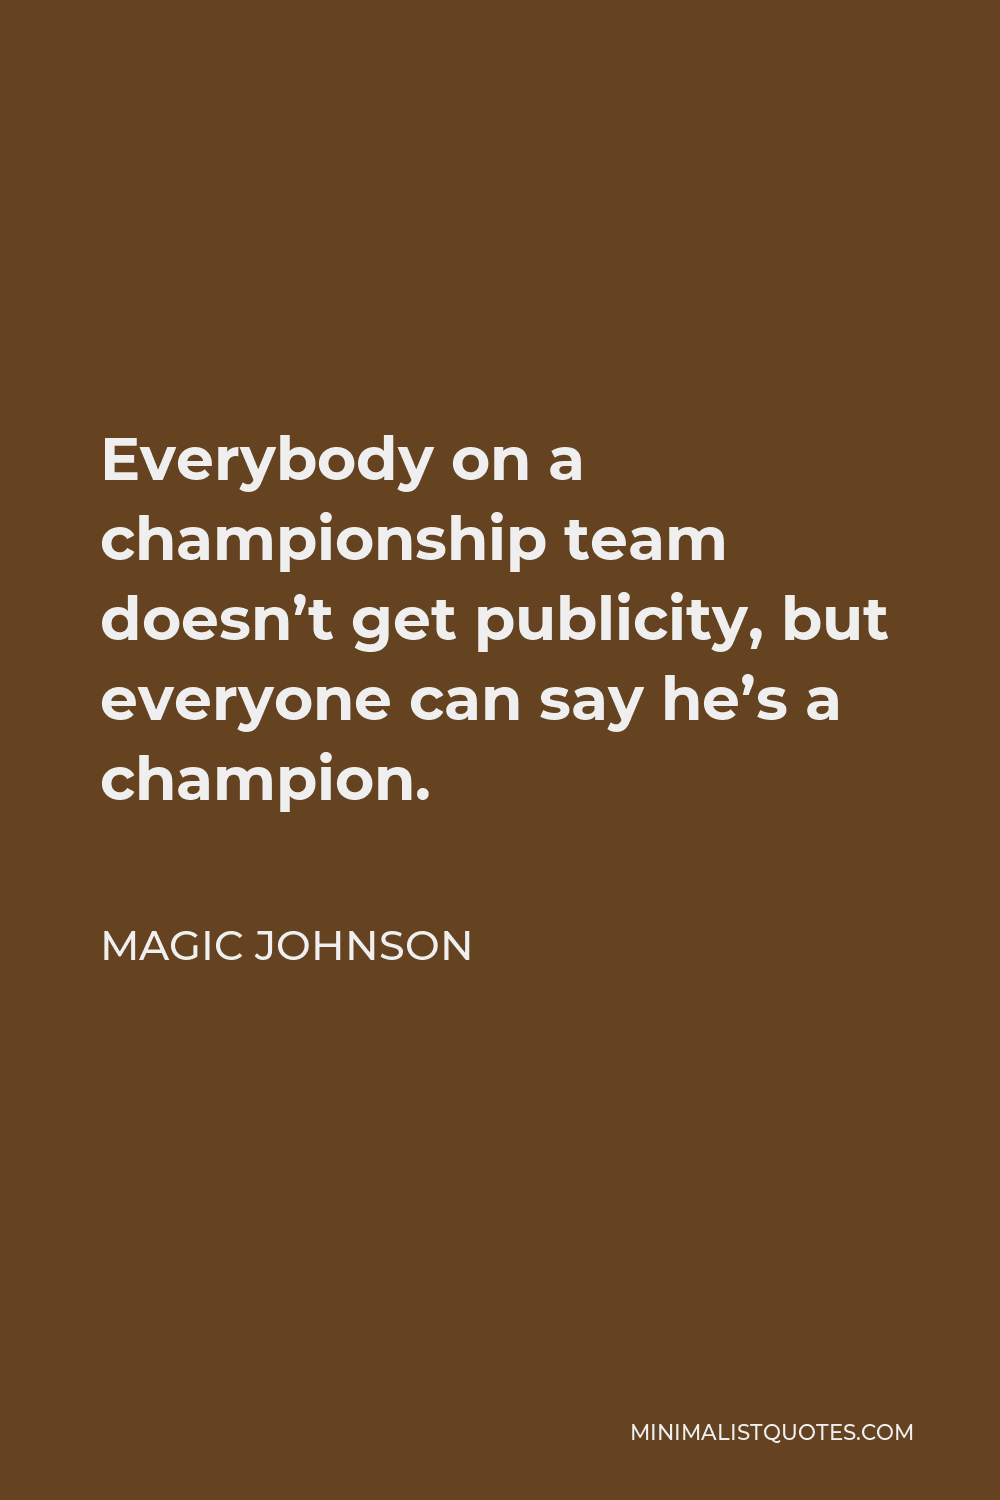 Magic Johnson Quote - Everybody on a championship team doesn’t get publicity, but everyone can say he’s a champion.